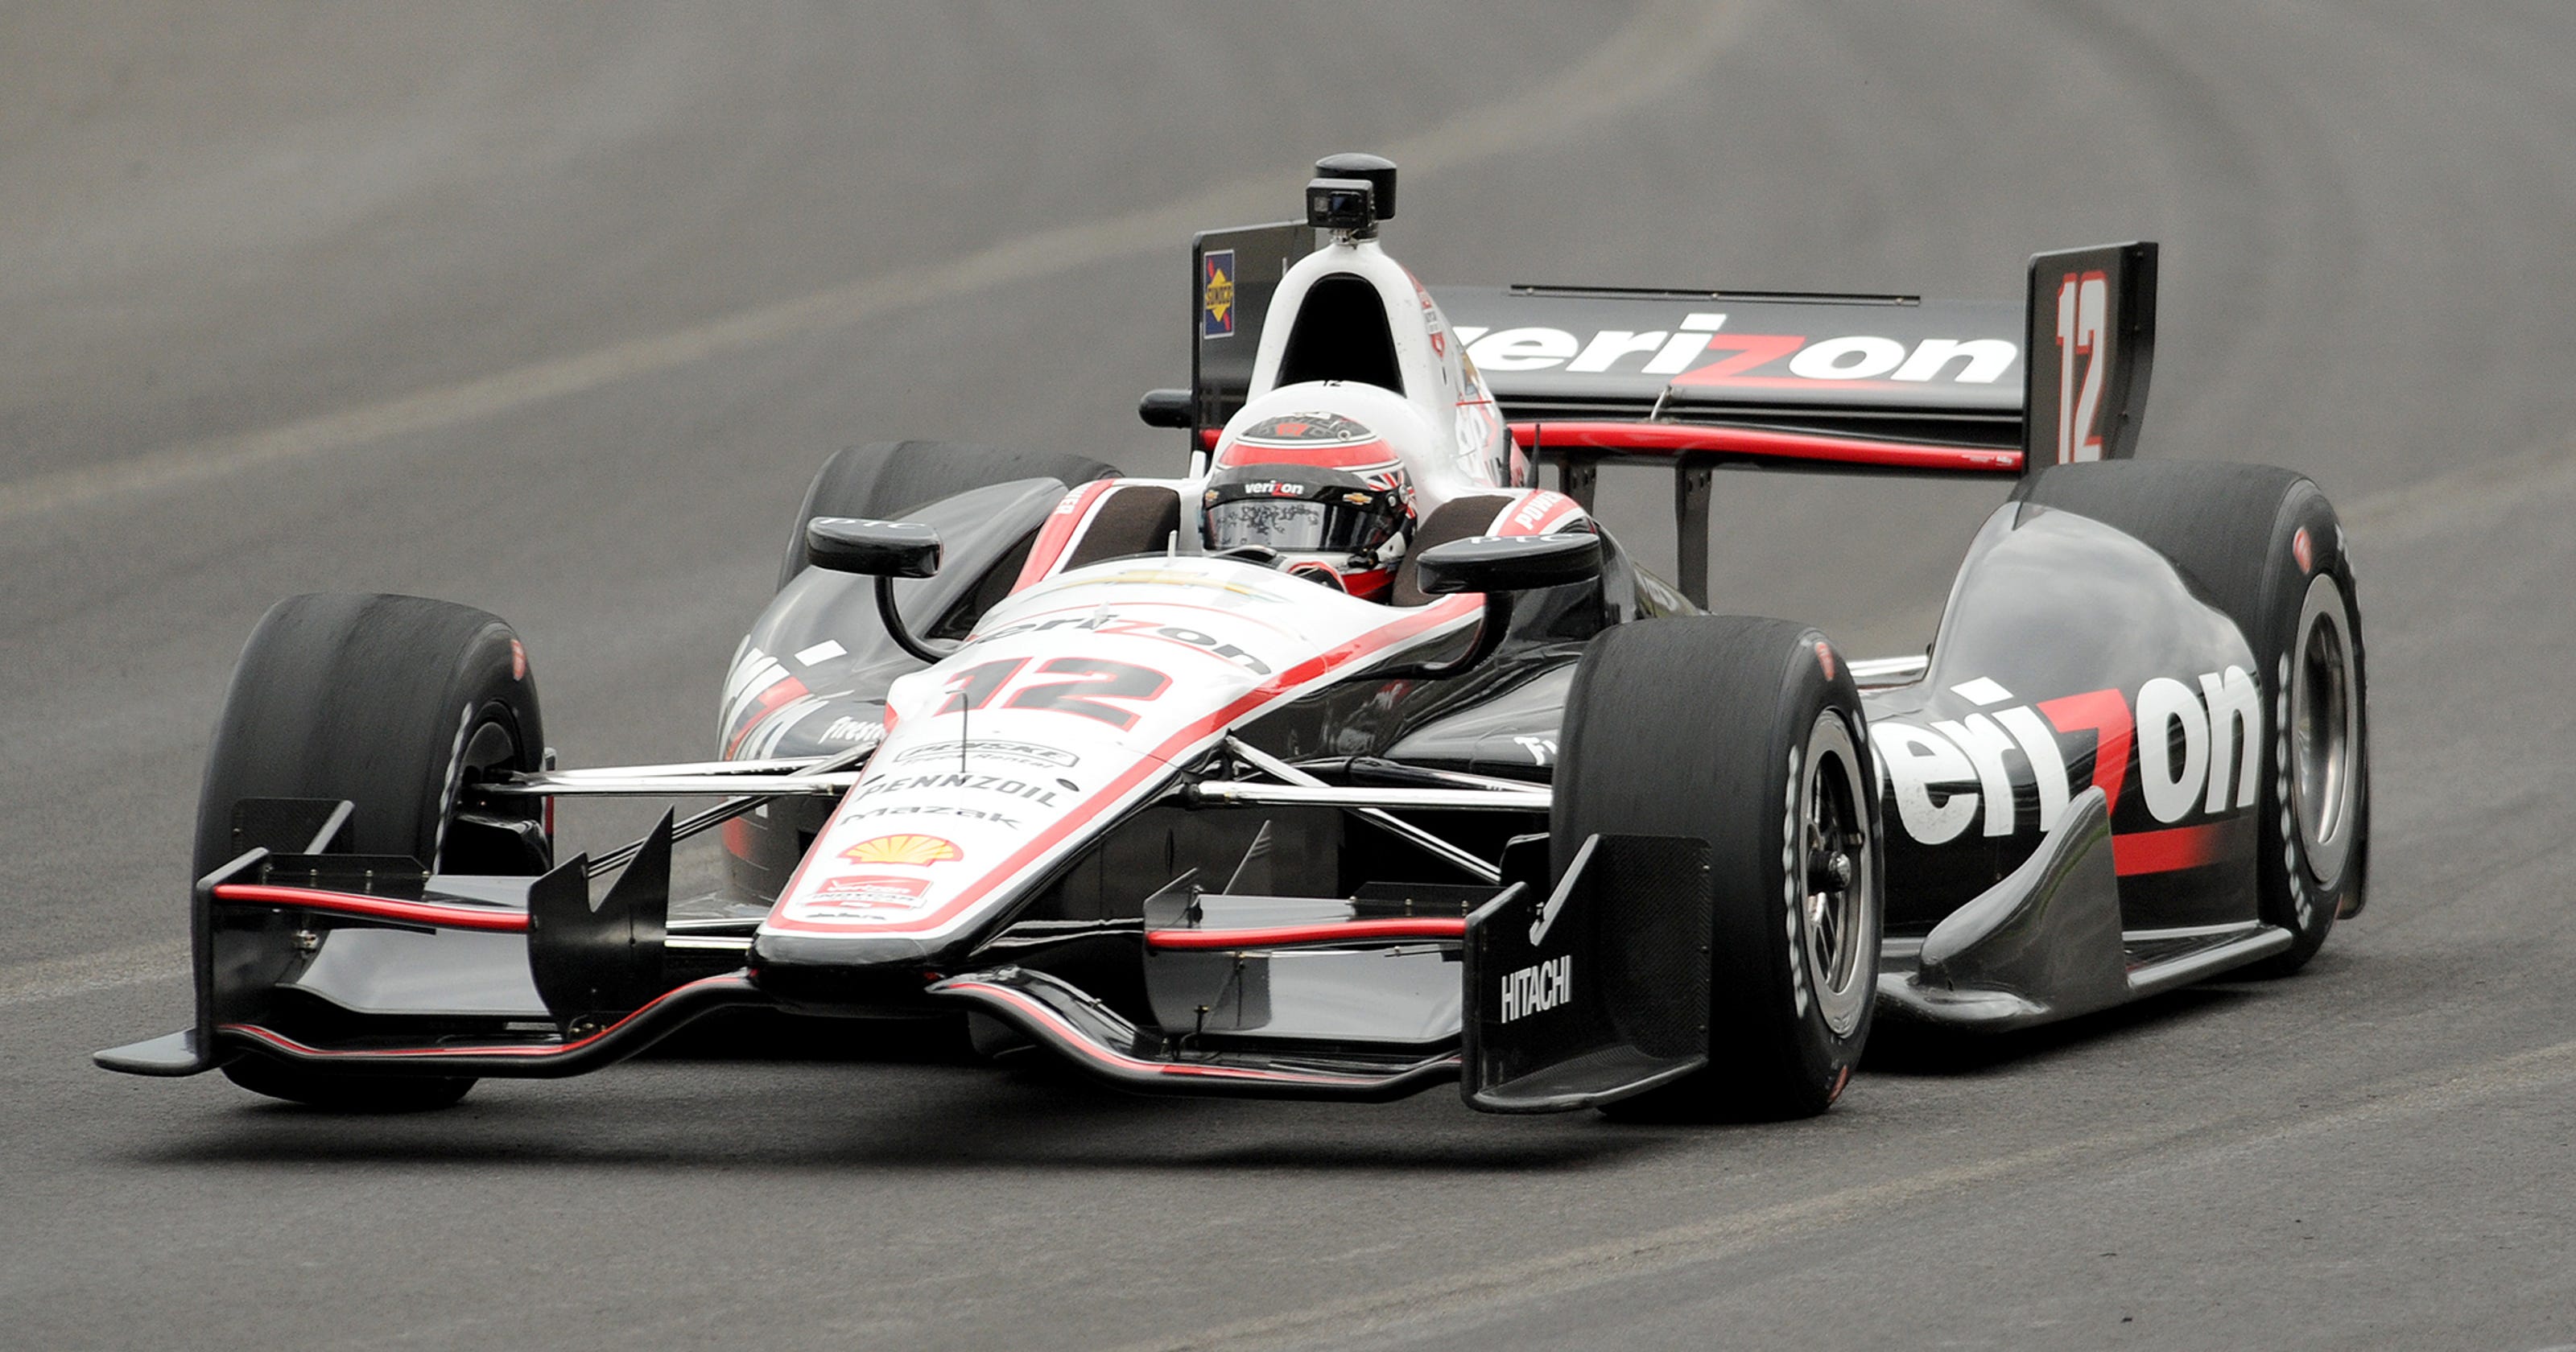 cars-will-be-different-for-grand-prix-indy-500-races